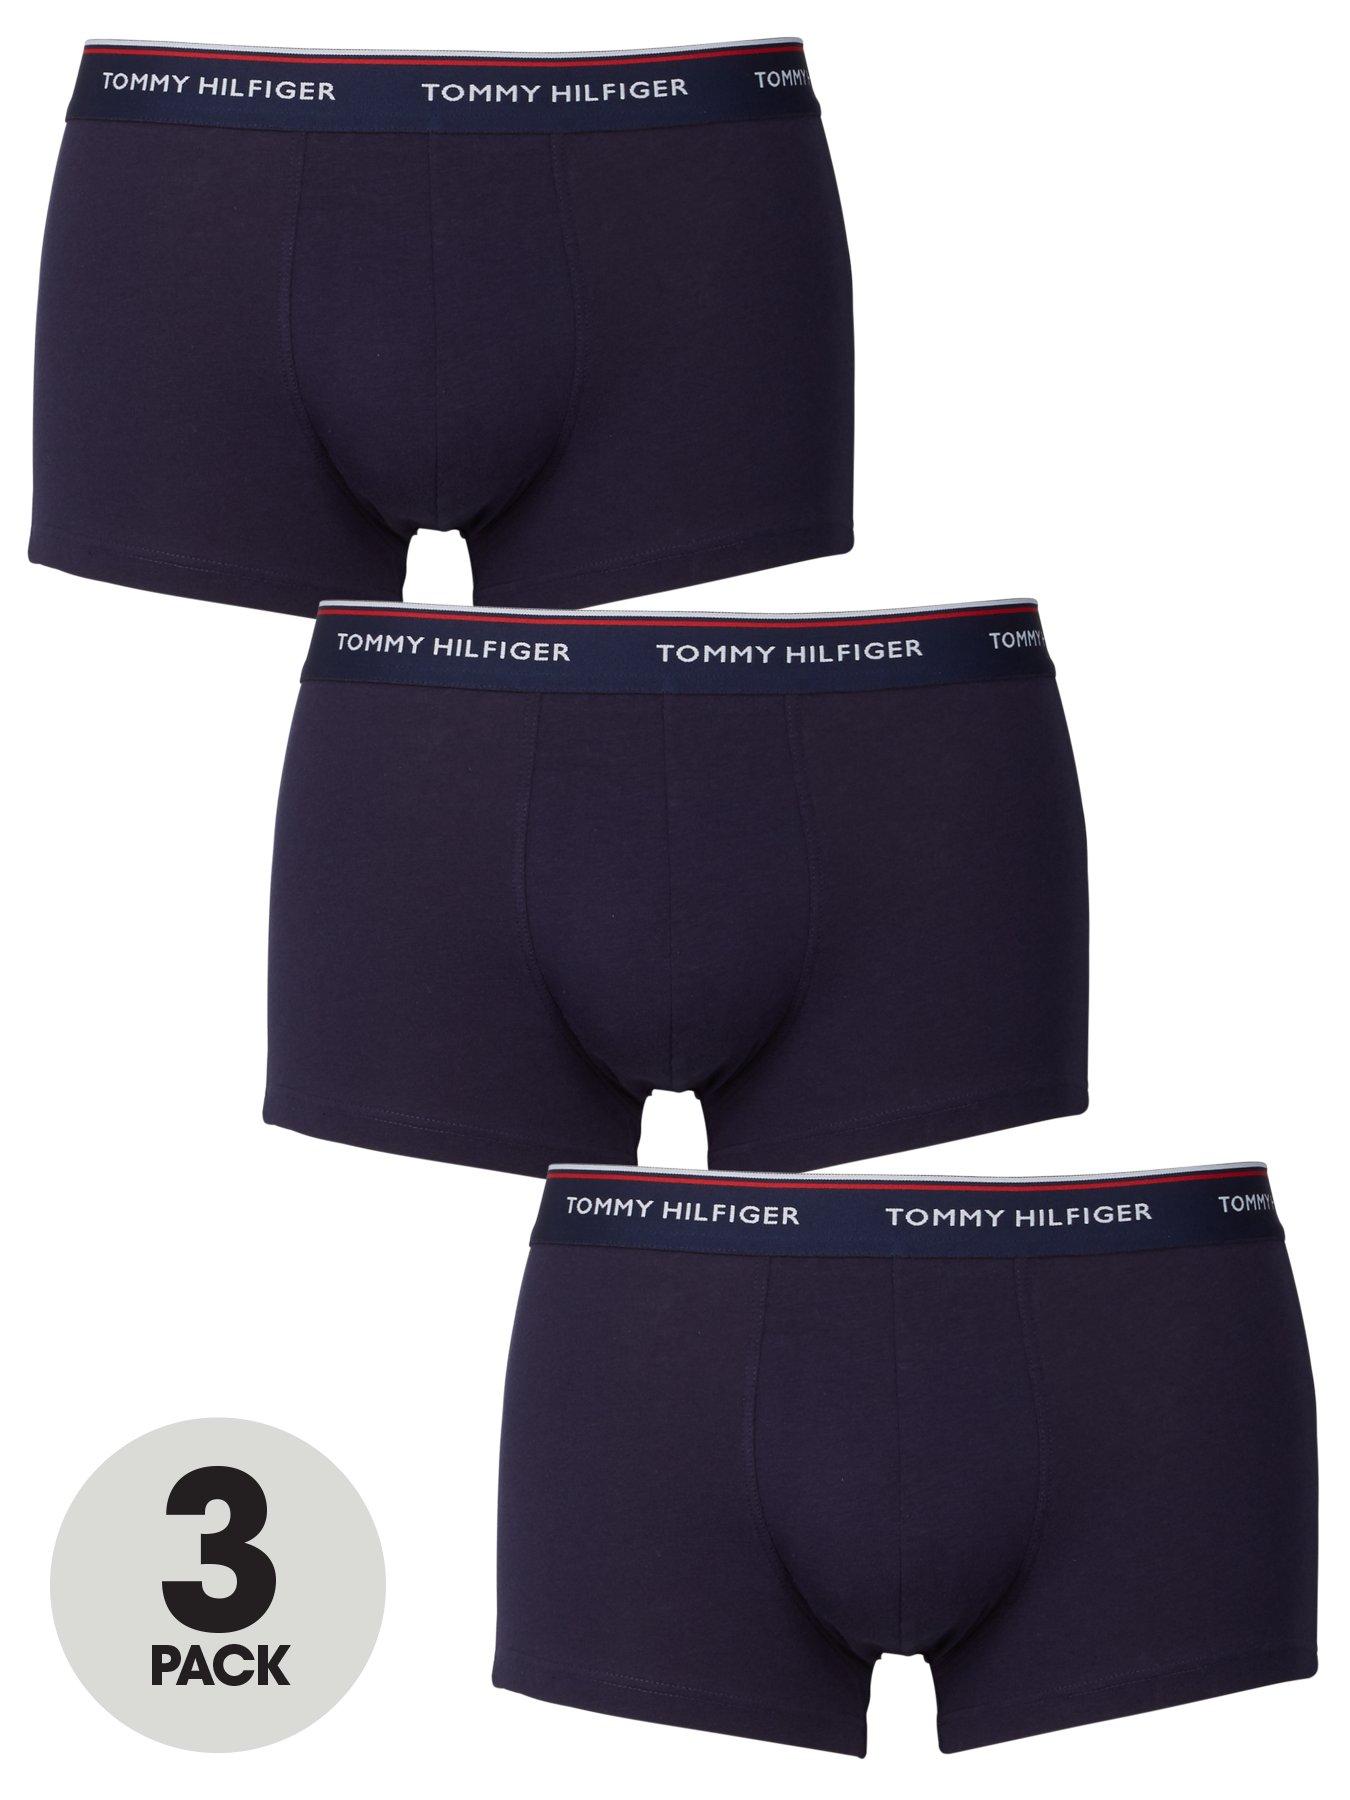 Tommy Hilfiger Low Rise Trunk 3 Pack Boxers - Navy, Navy, Size Xl, Men